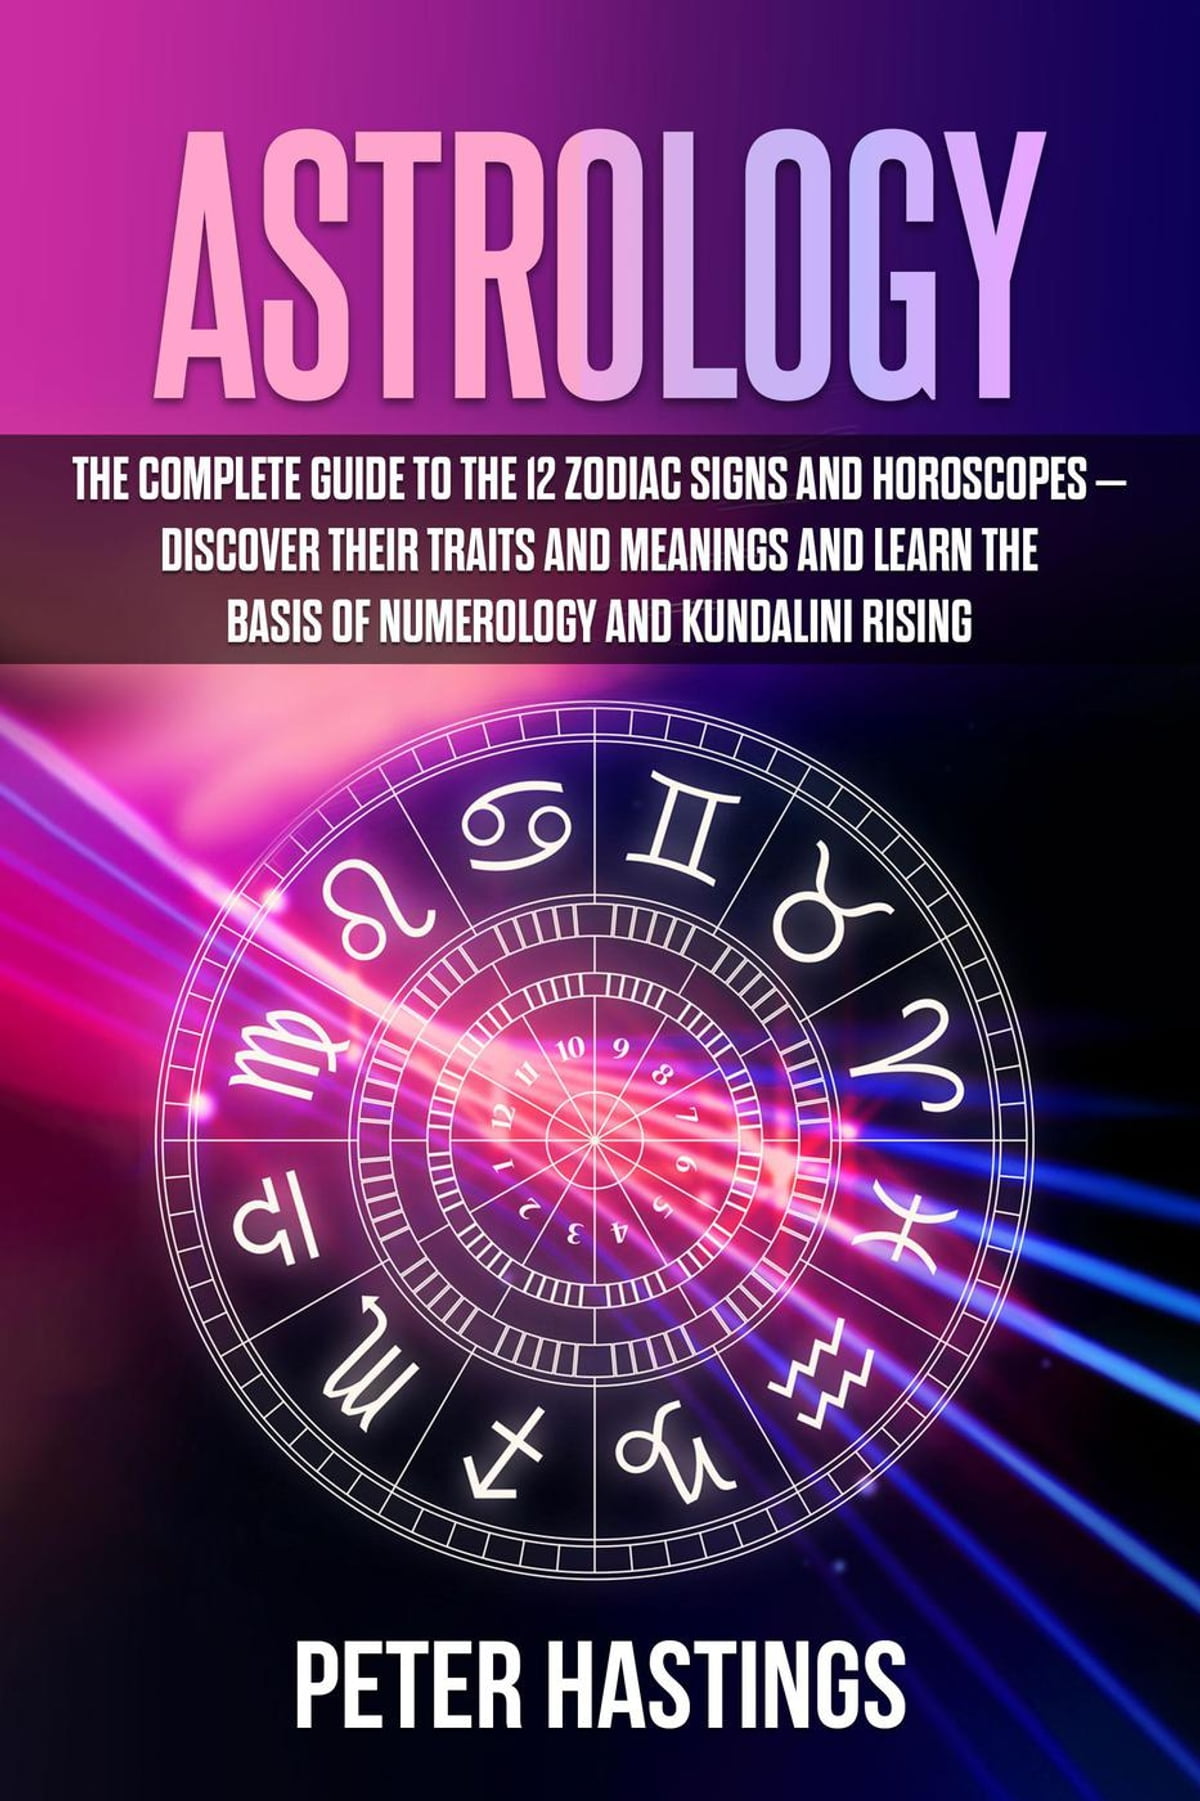 Astrology: The Complete Guide to the 12 Zodiac Signs and Horoscopes –  Discover their Traits and Meanings and Learn the basis of Numerology and  Kundalini Rising eBook by Peter Hastings | Rakuten Kobo